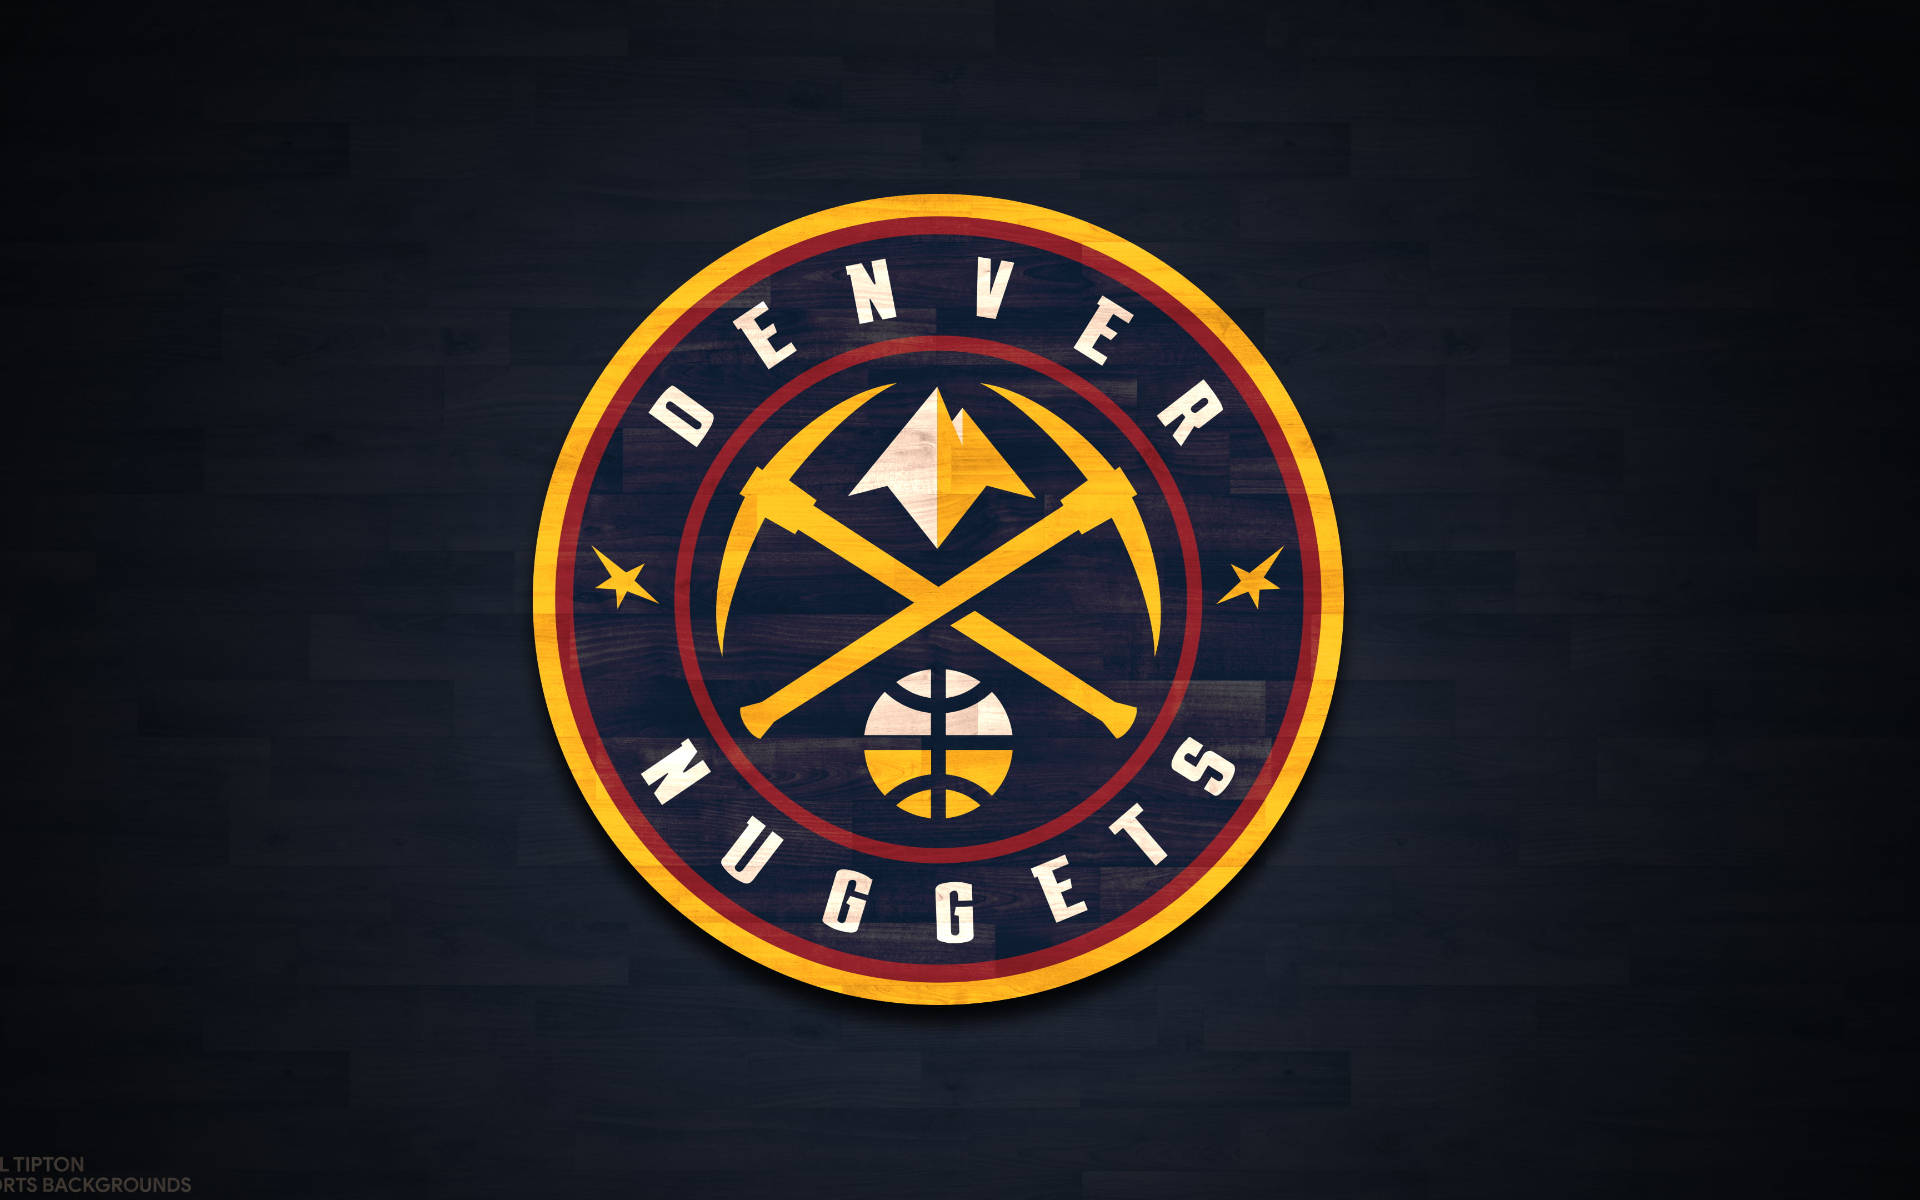 Action-packed Denver Nuggets Basketball Game Background